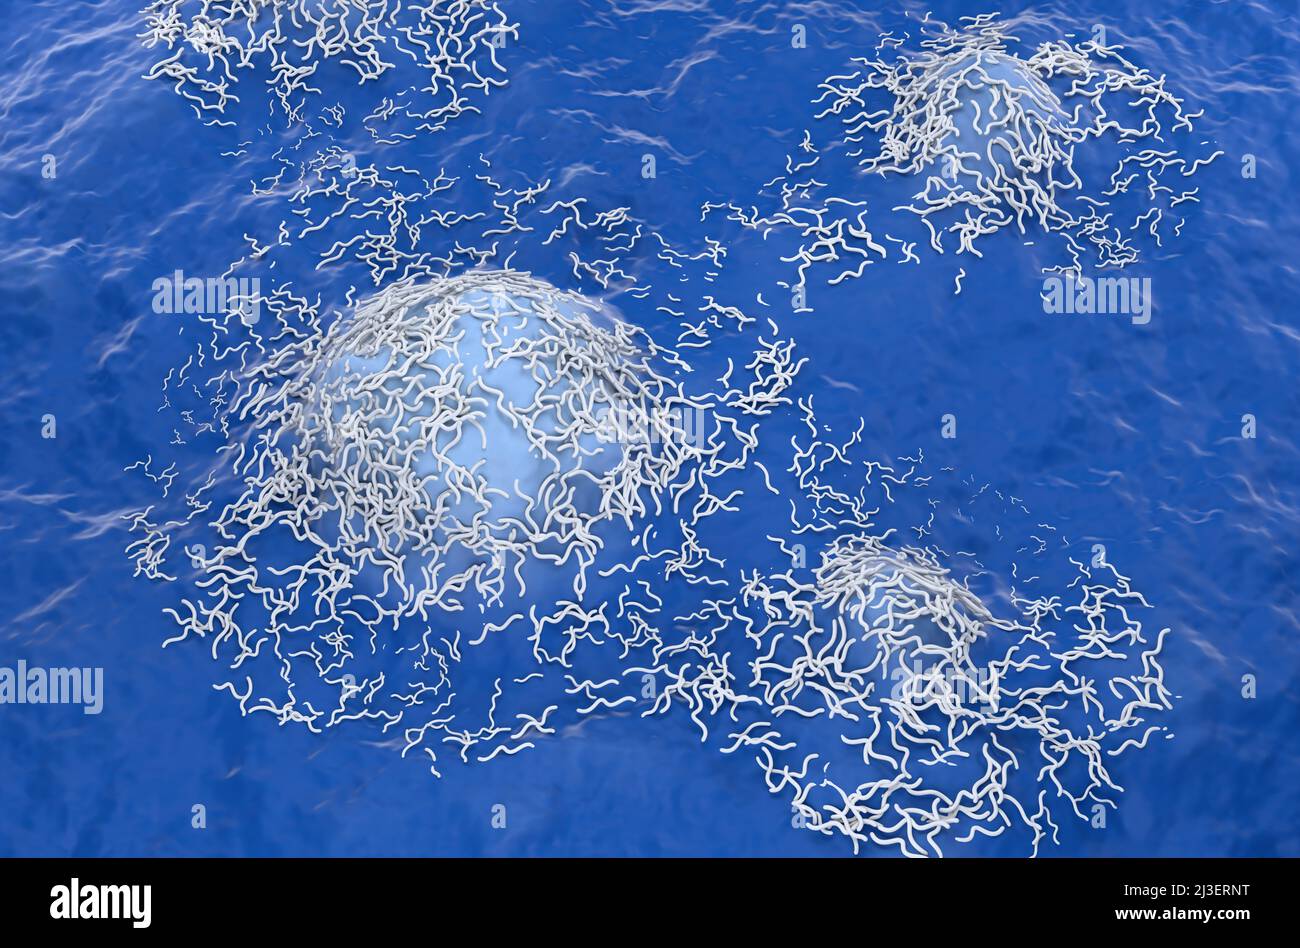 Ependymoma cancer cells (brain tumor) - isometric view 3d illustration Stock Photo